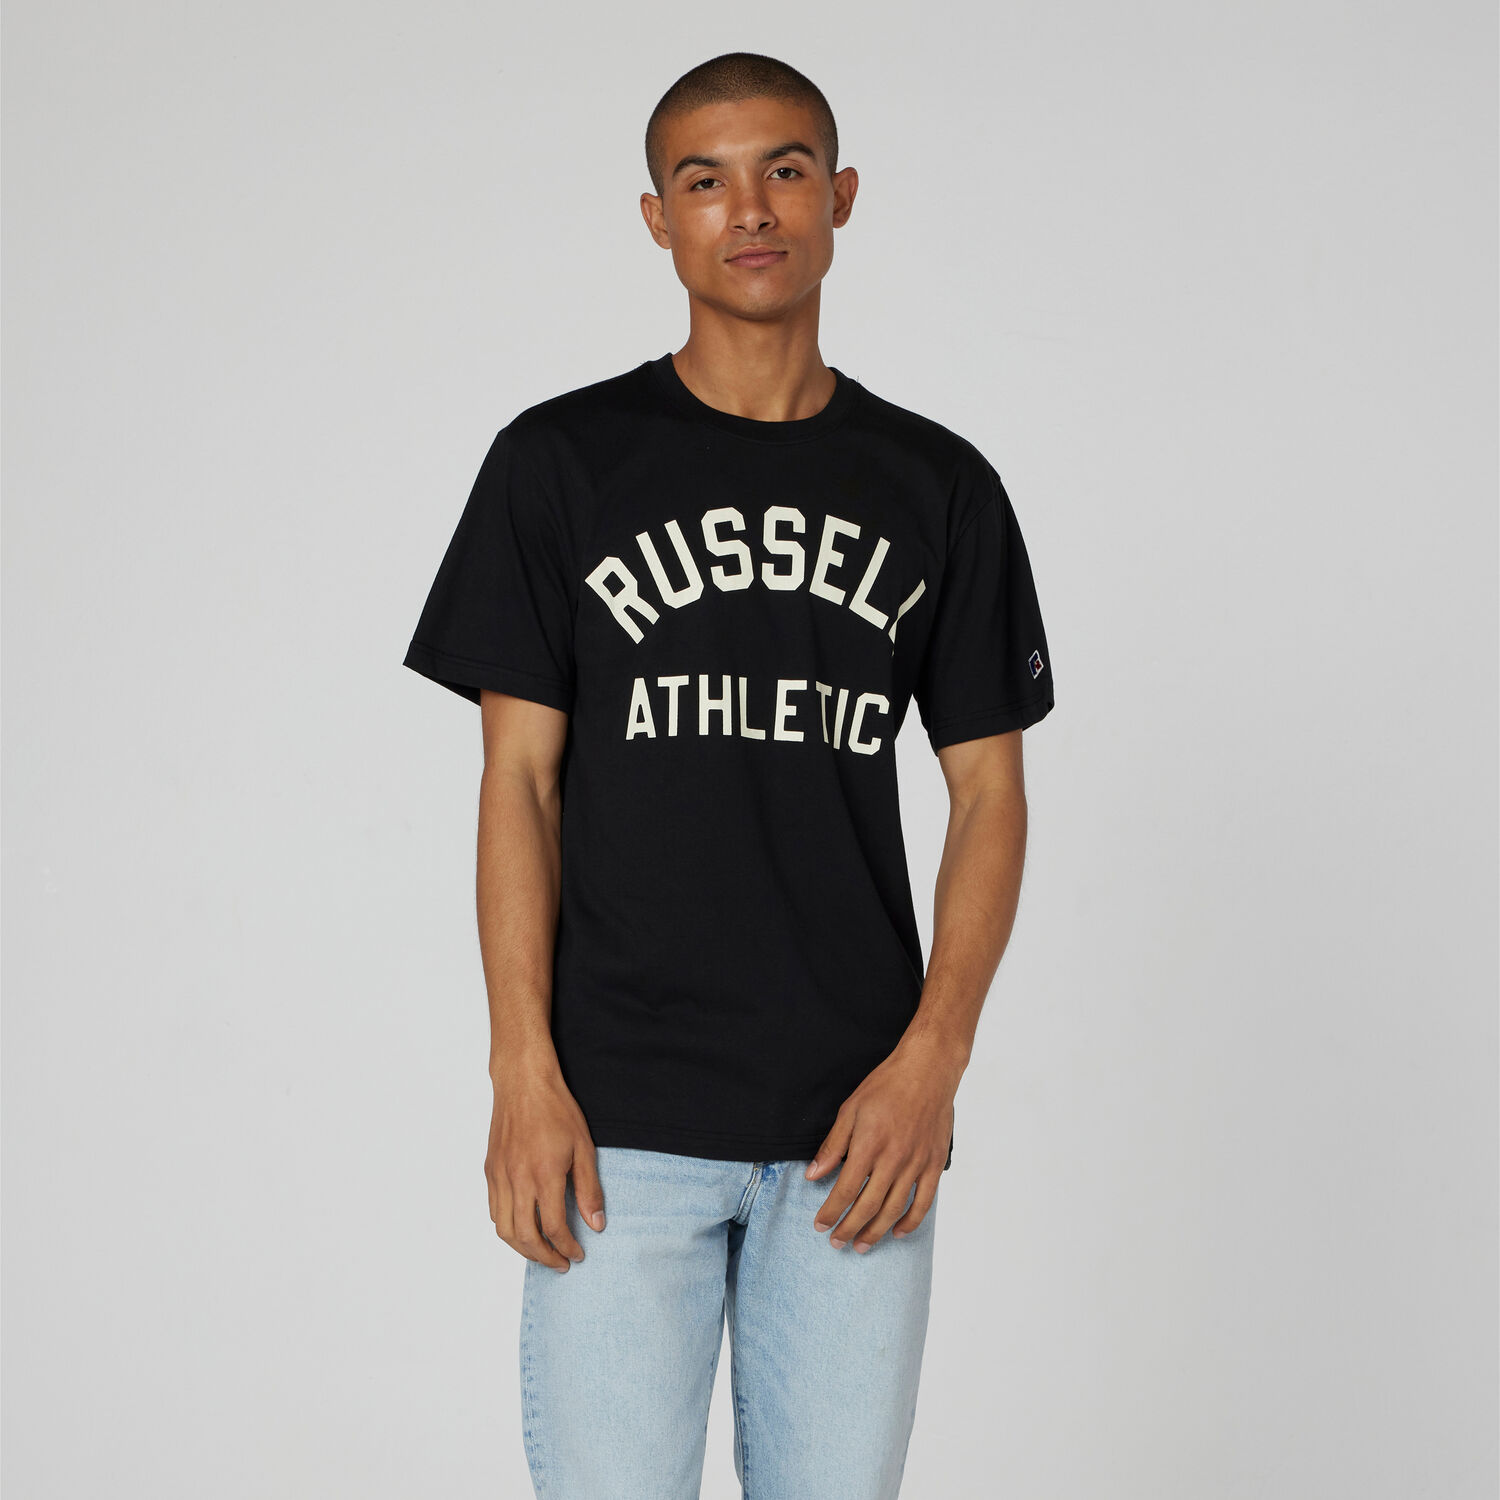 Russell Athletic Men's T-Shirt - White - L